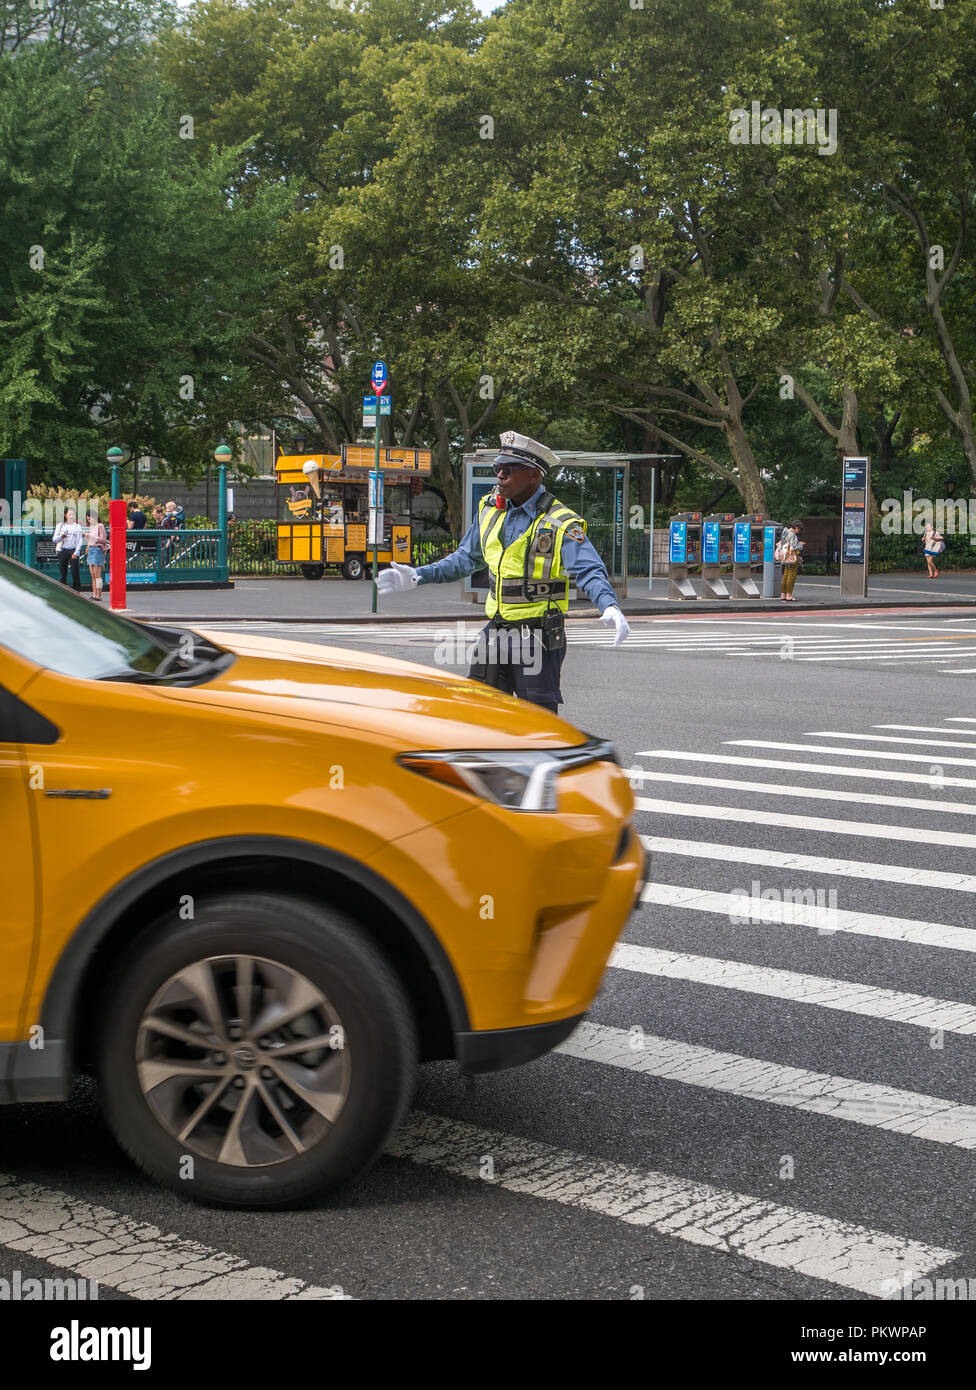 New York City, USA - September 8, 2018: Traffic police man is directing cars on roads in New York City. Stock Photo